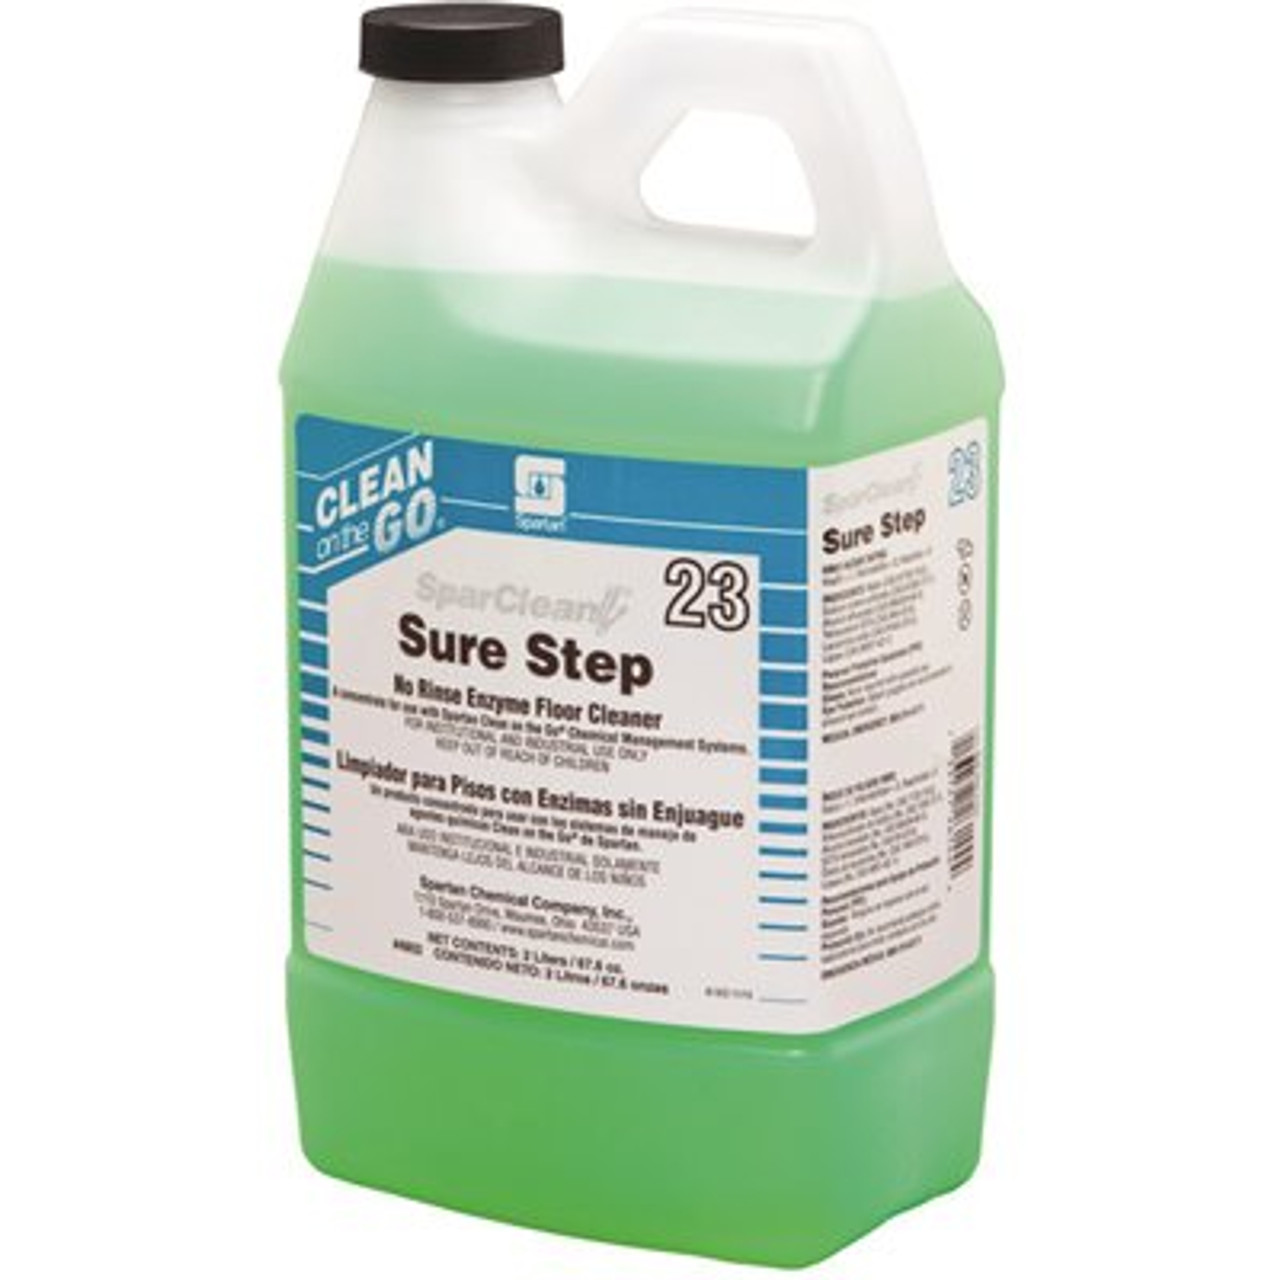 Spartan Chemical Company Sparclean Sure Step 2 Liter Clean Scent Enzyme Floor Cleaner